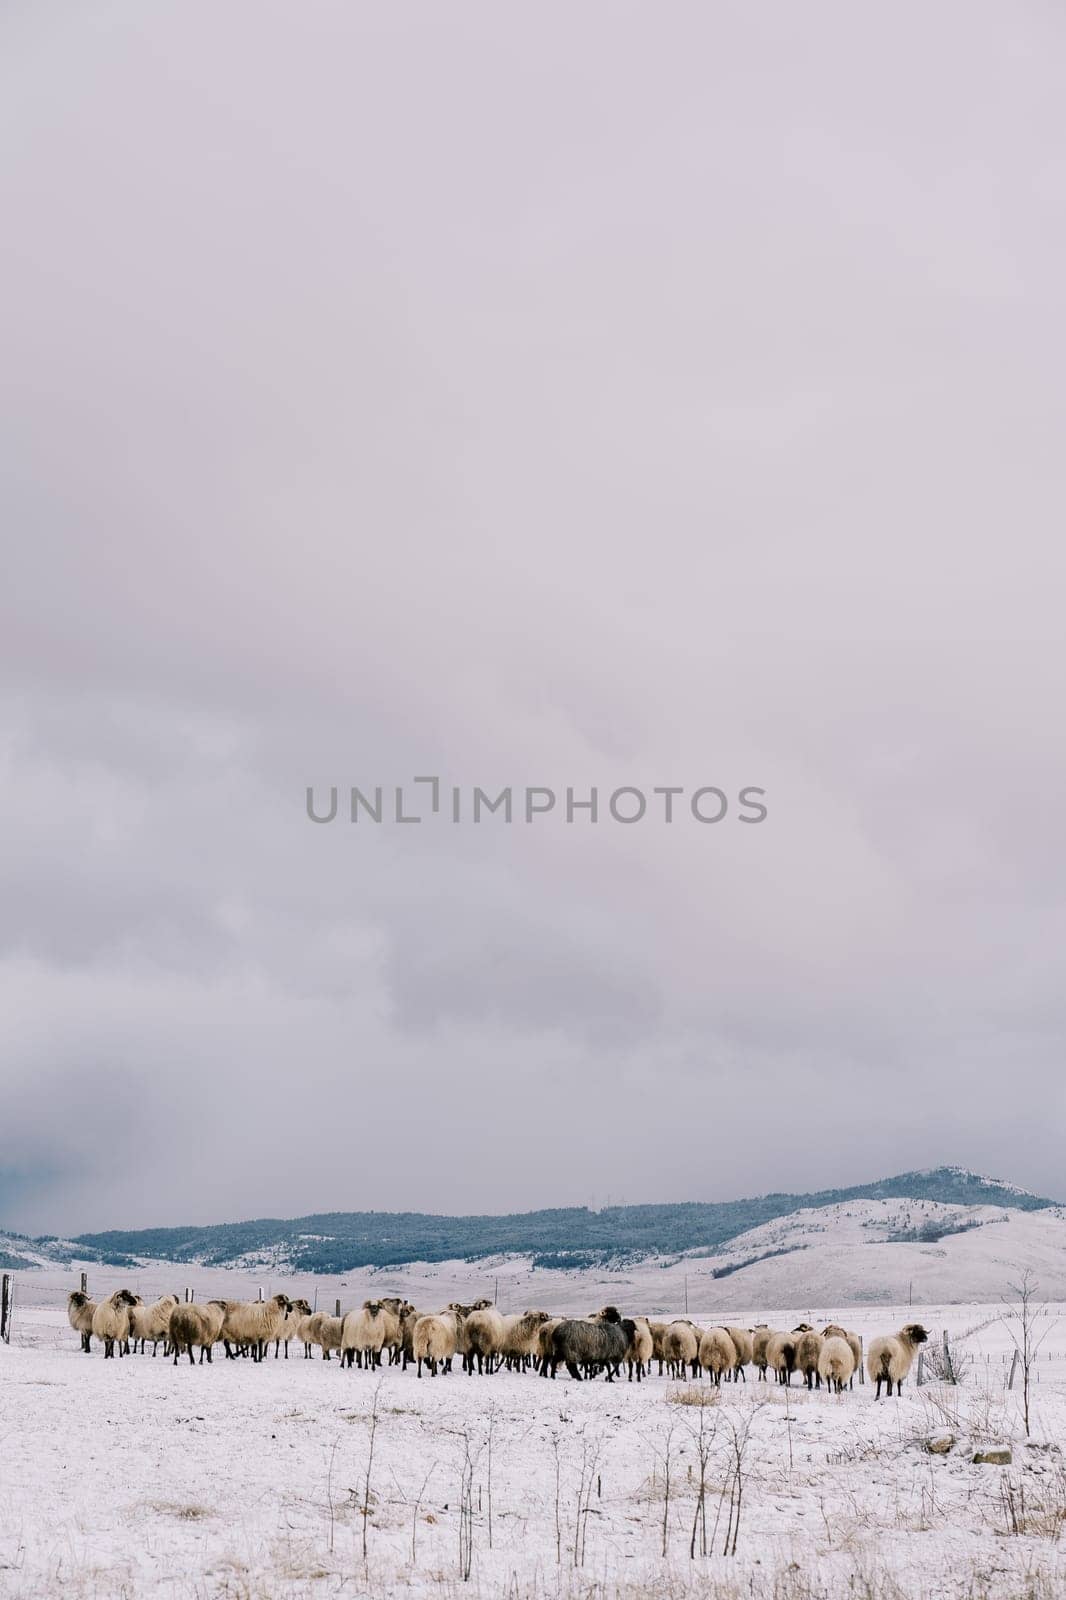 Herd of sheep walks through a snow-covered pasture in a mountain valley. High quality photo